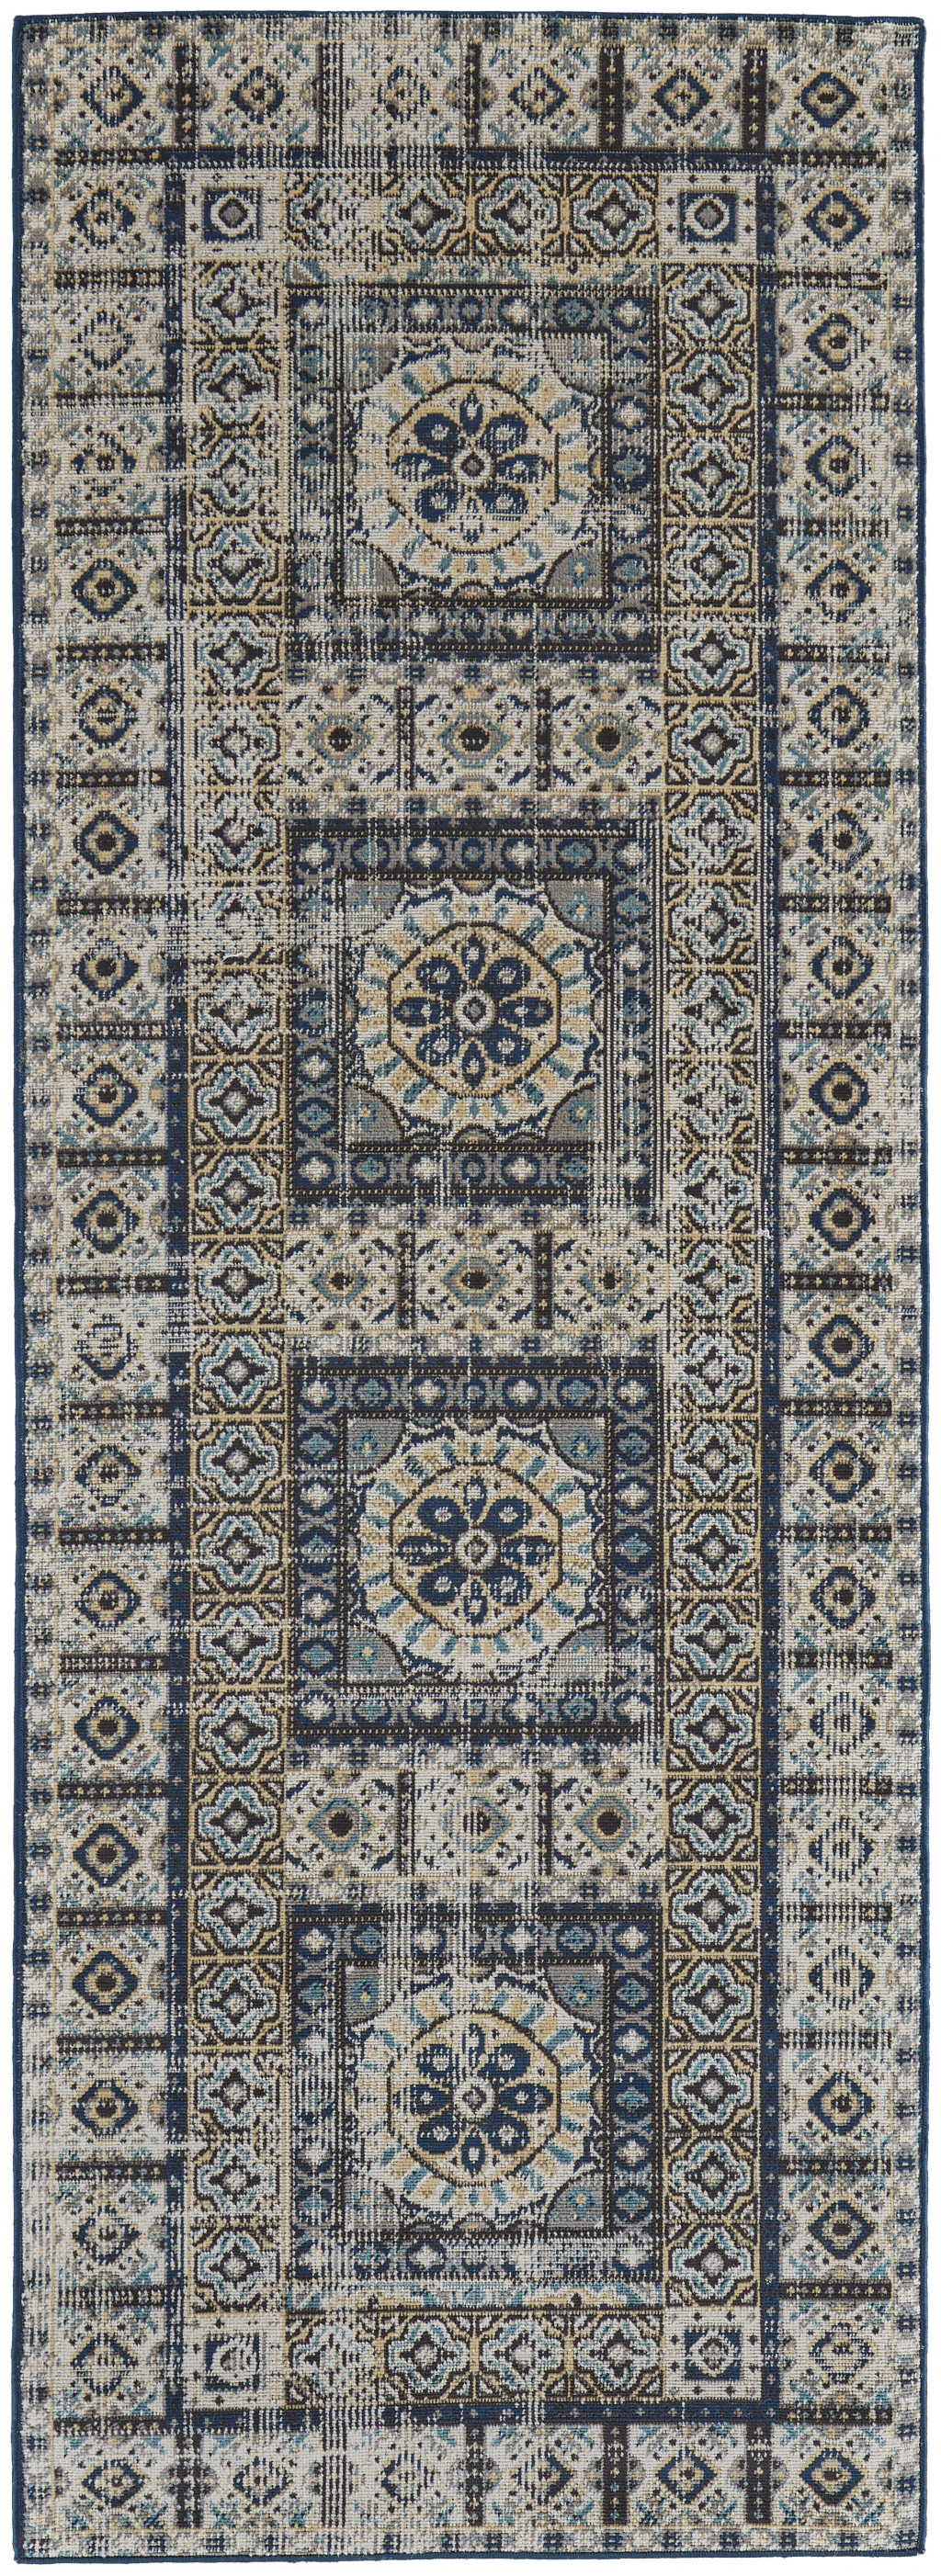 8' Ivory Tan And Blue Abstract Power Loom Distressed Stain Resistant Runner Rug-514630-1